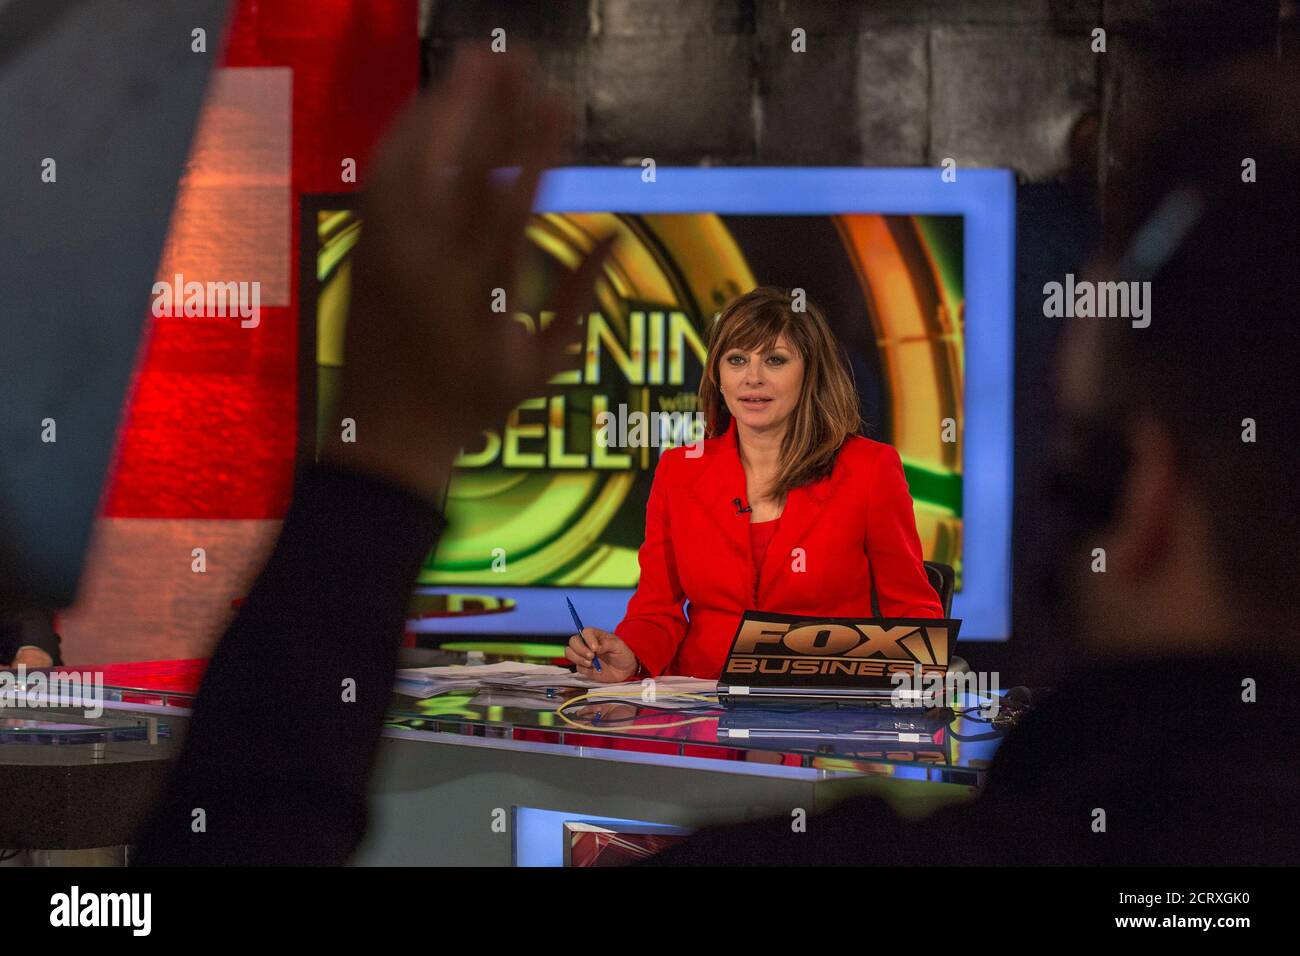 Maria Bartiromo debuts her new show 'Opening Bell with Maria Bartiromo' on the Fox Business Network in New York February 24, 2014.  Bartiromo, whose high-profile Wall Street coverage earned her the nickname 'Money Honey' during two decades on business channel CNBC, now takes aim at her former employer as host of a new morning show on the rival Fox Business Network. REUTERS/Brendan McDermid (UNITED STATES - Tags: BUSINESS ENTERTAINMENT MEDIA) Stock Photo